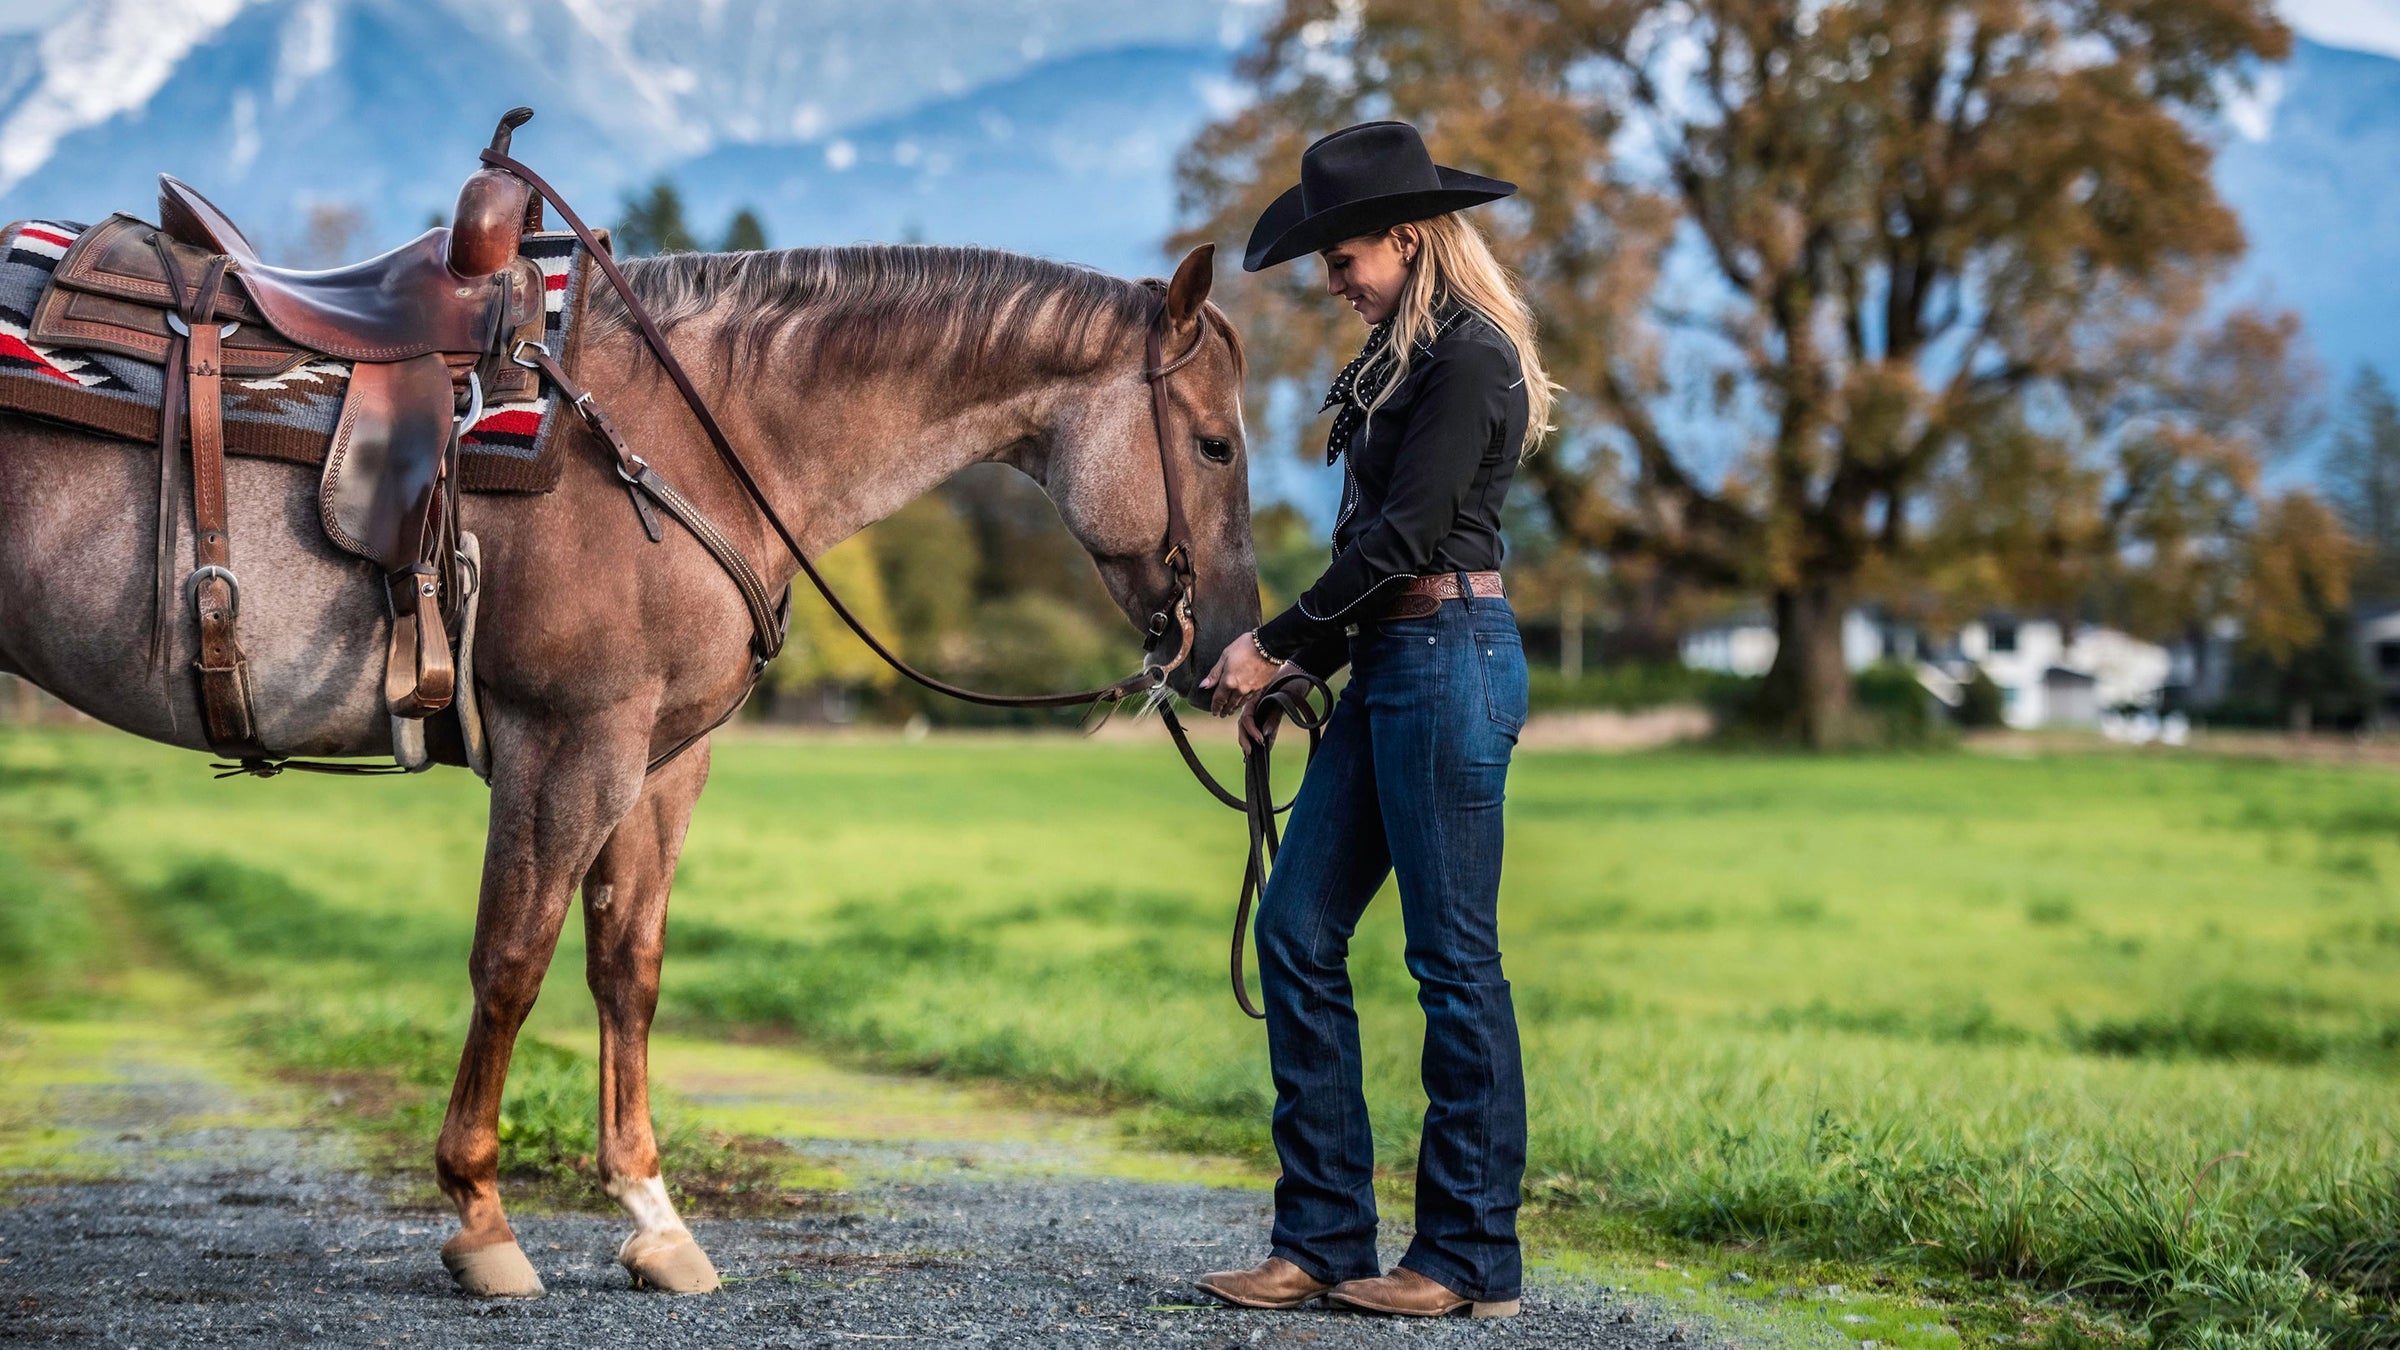 Riding Jeans for Women, Flattering and functional riding jeans